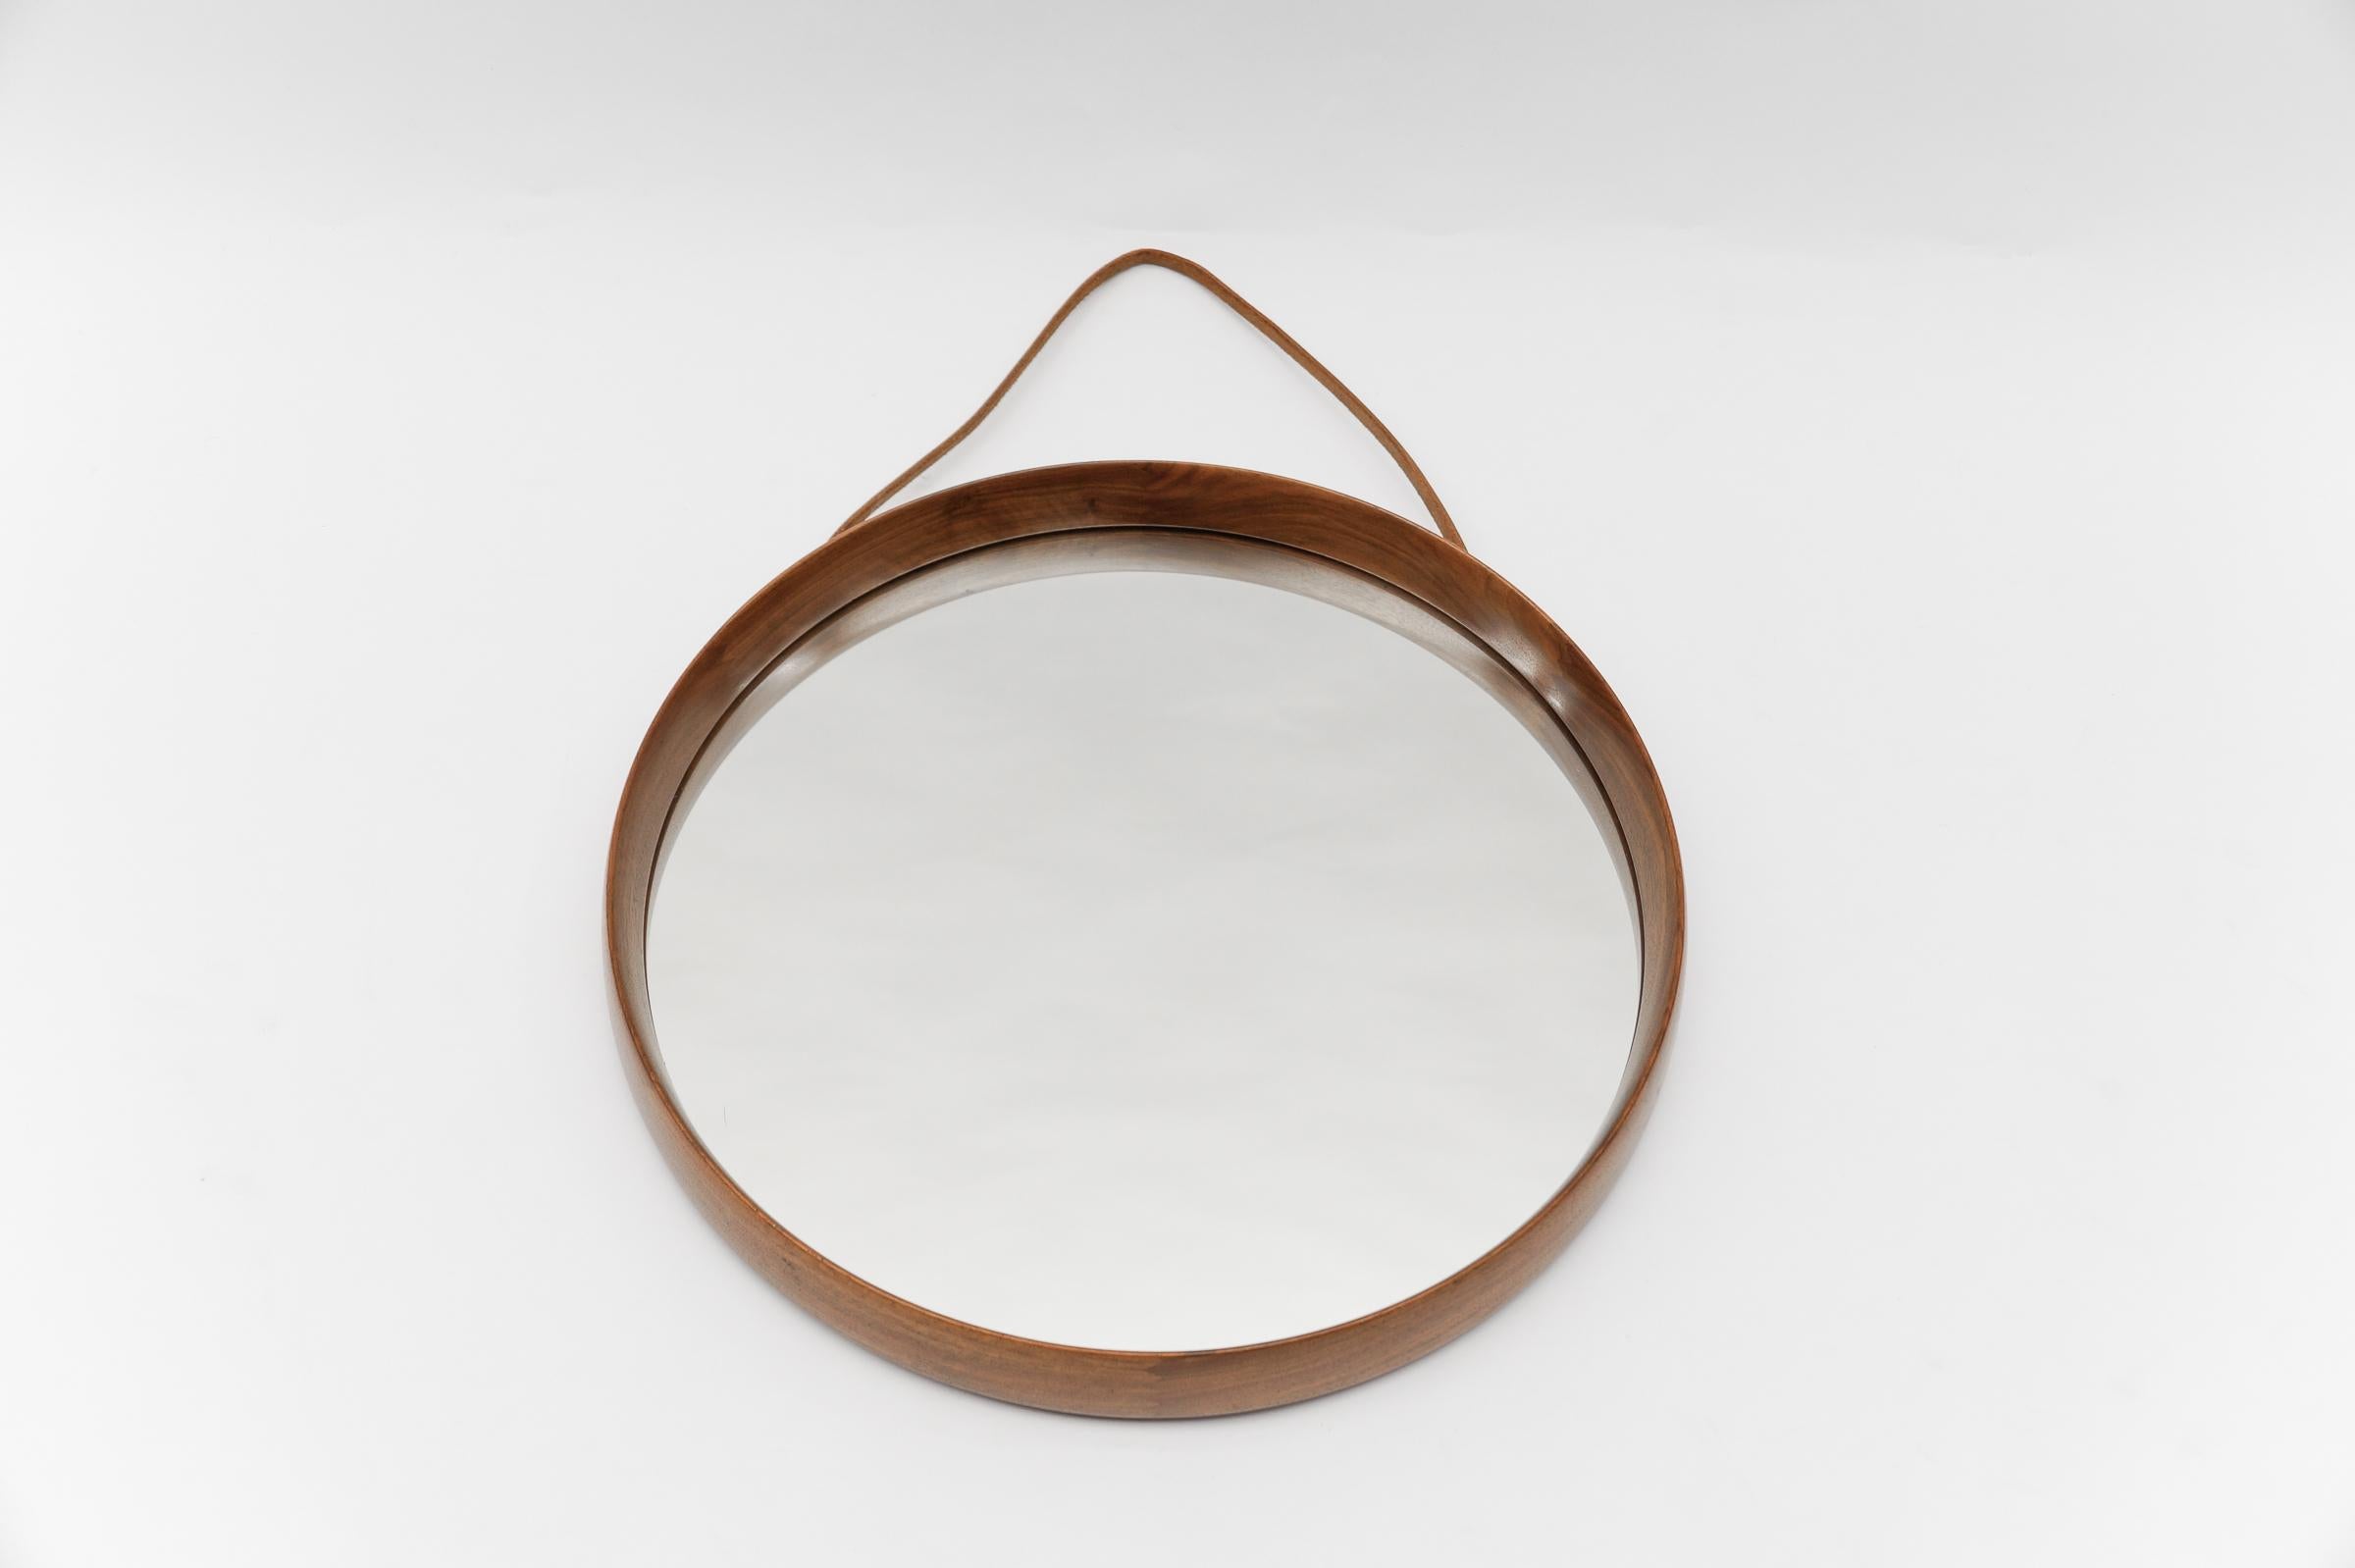 Scandinavian Modern Lovely Round Wall Mirror in Teak and Leather, Sweden 1960s For Sale